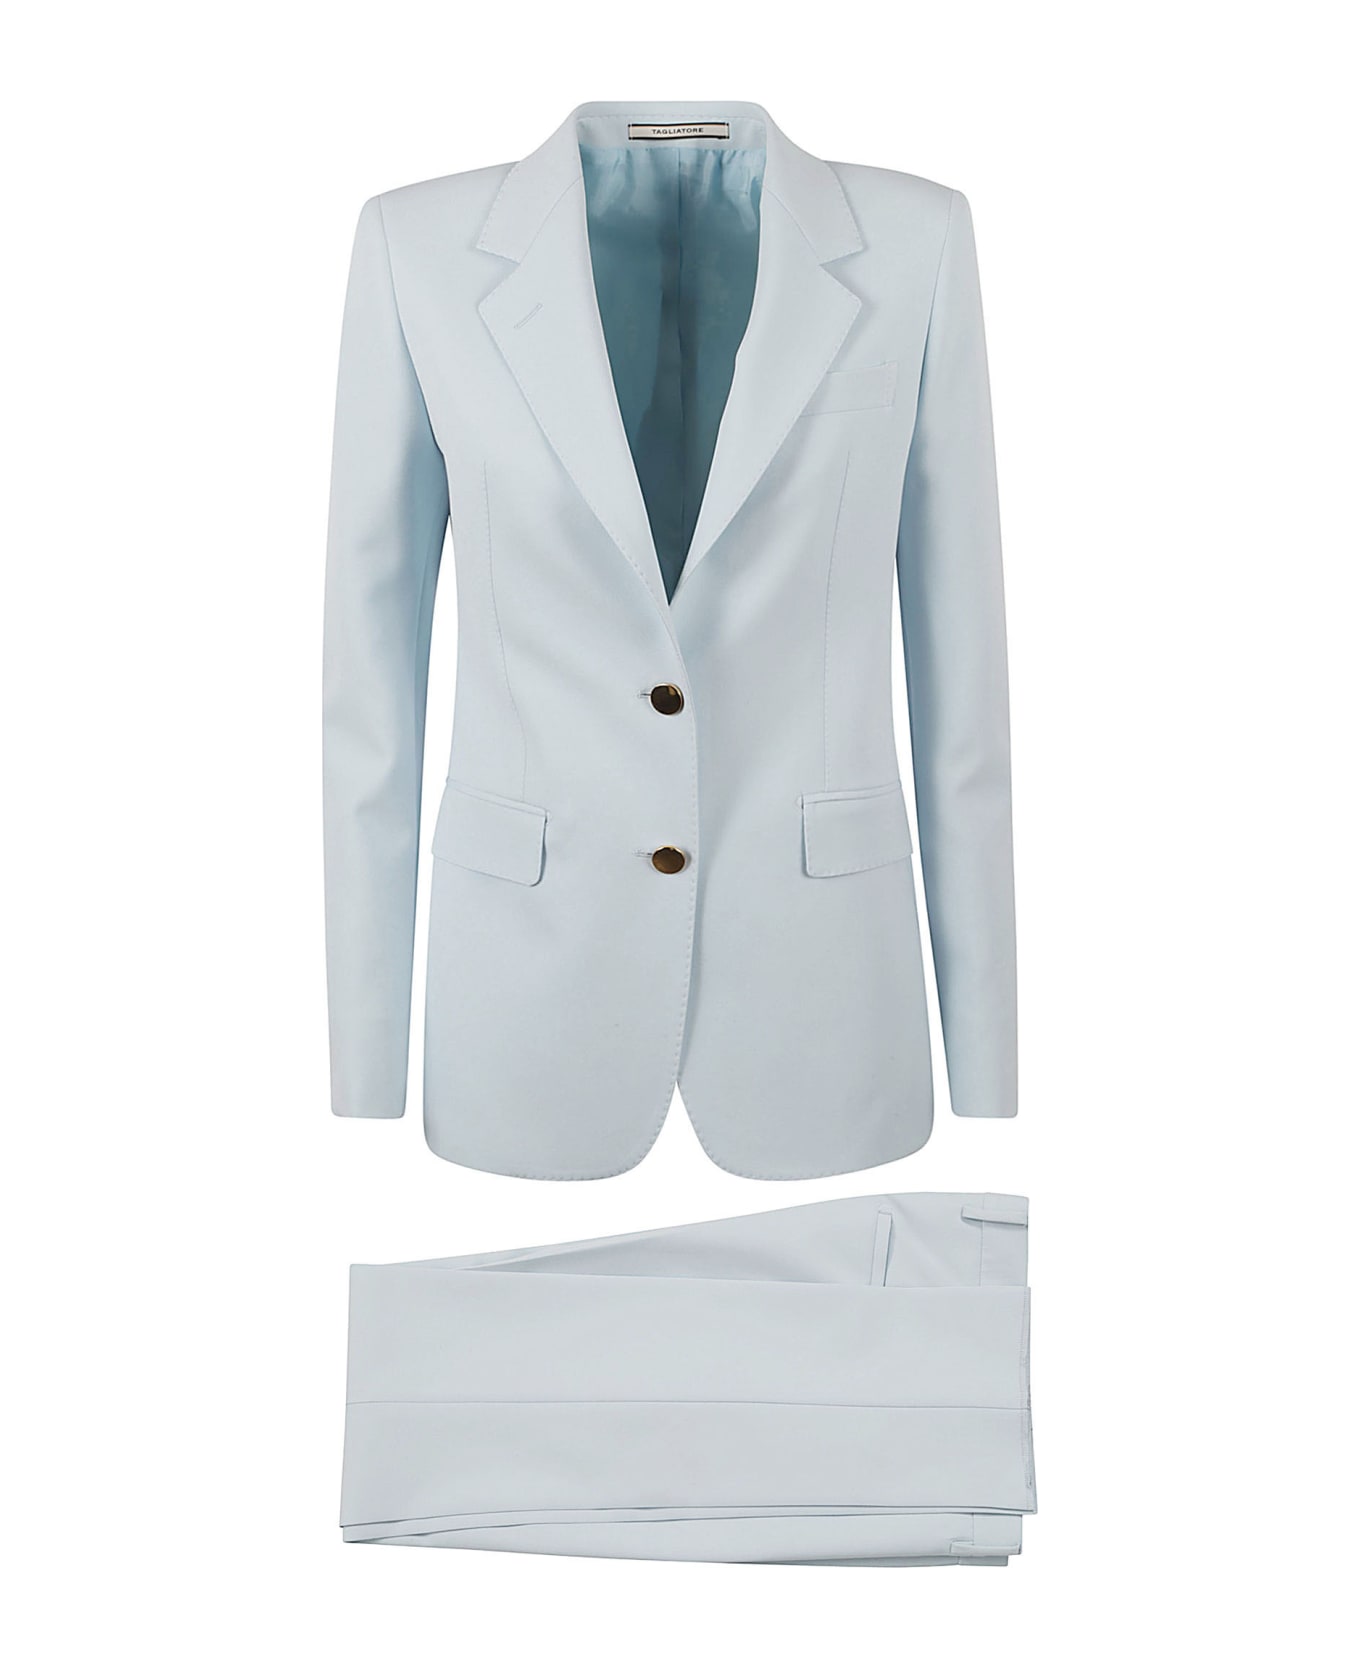 Tagliatore Two-button Suit - Clear Blue スーツ